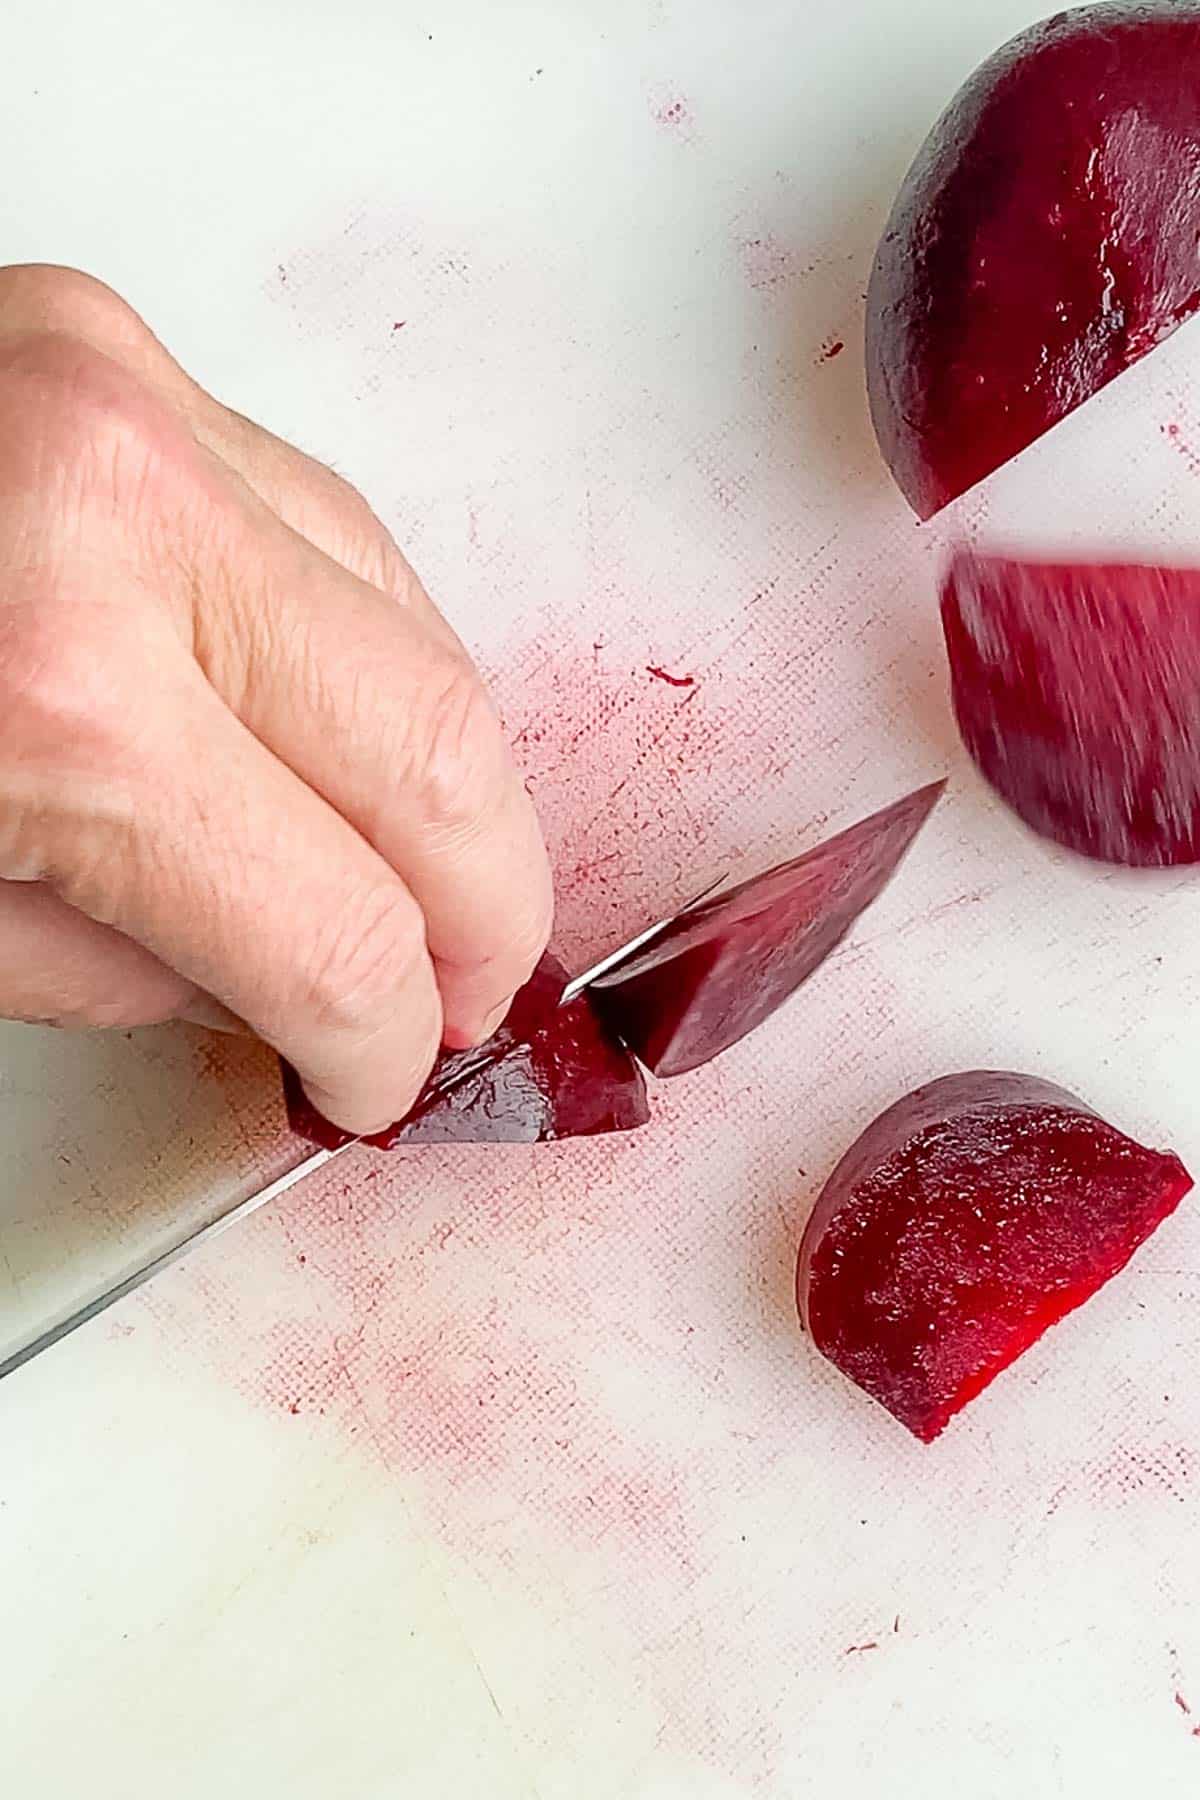 red beets are sliced into chunks